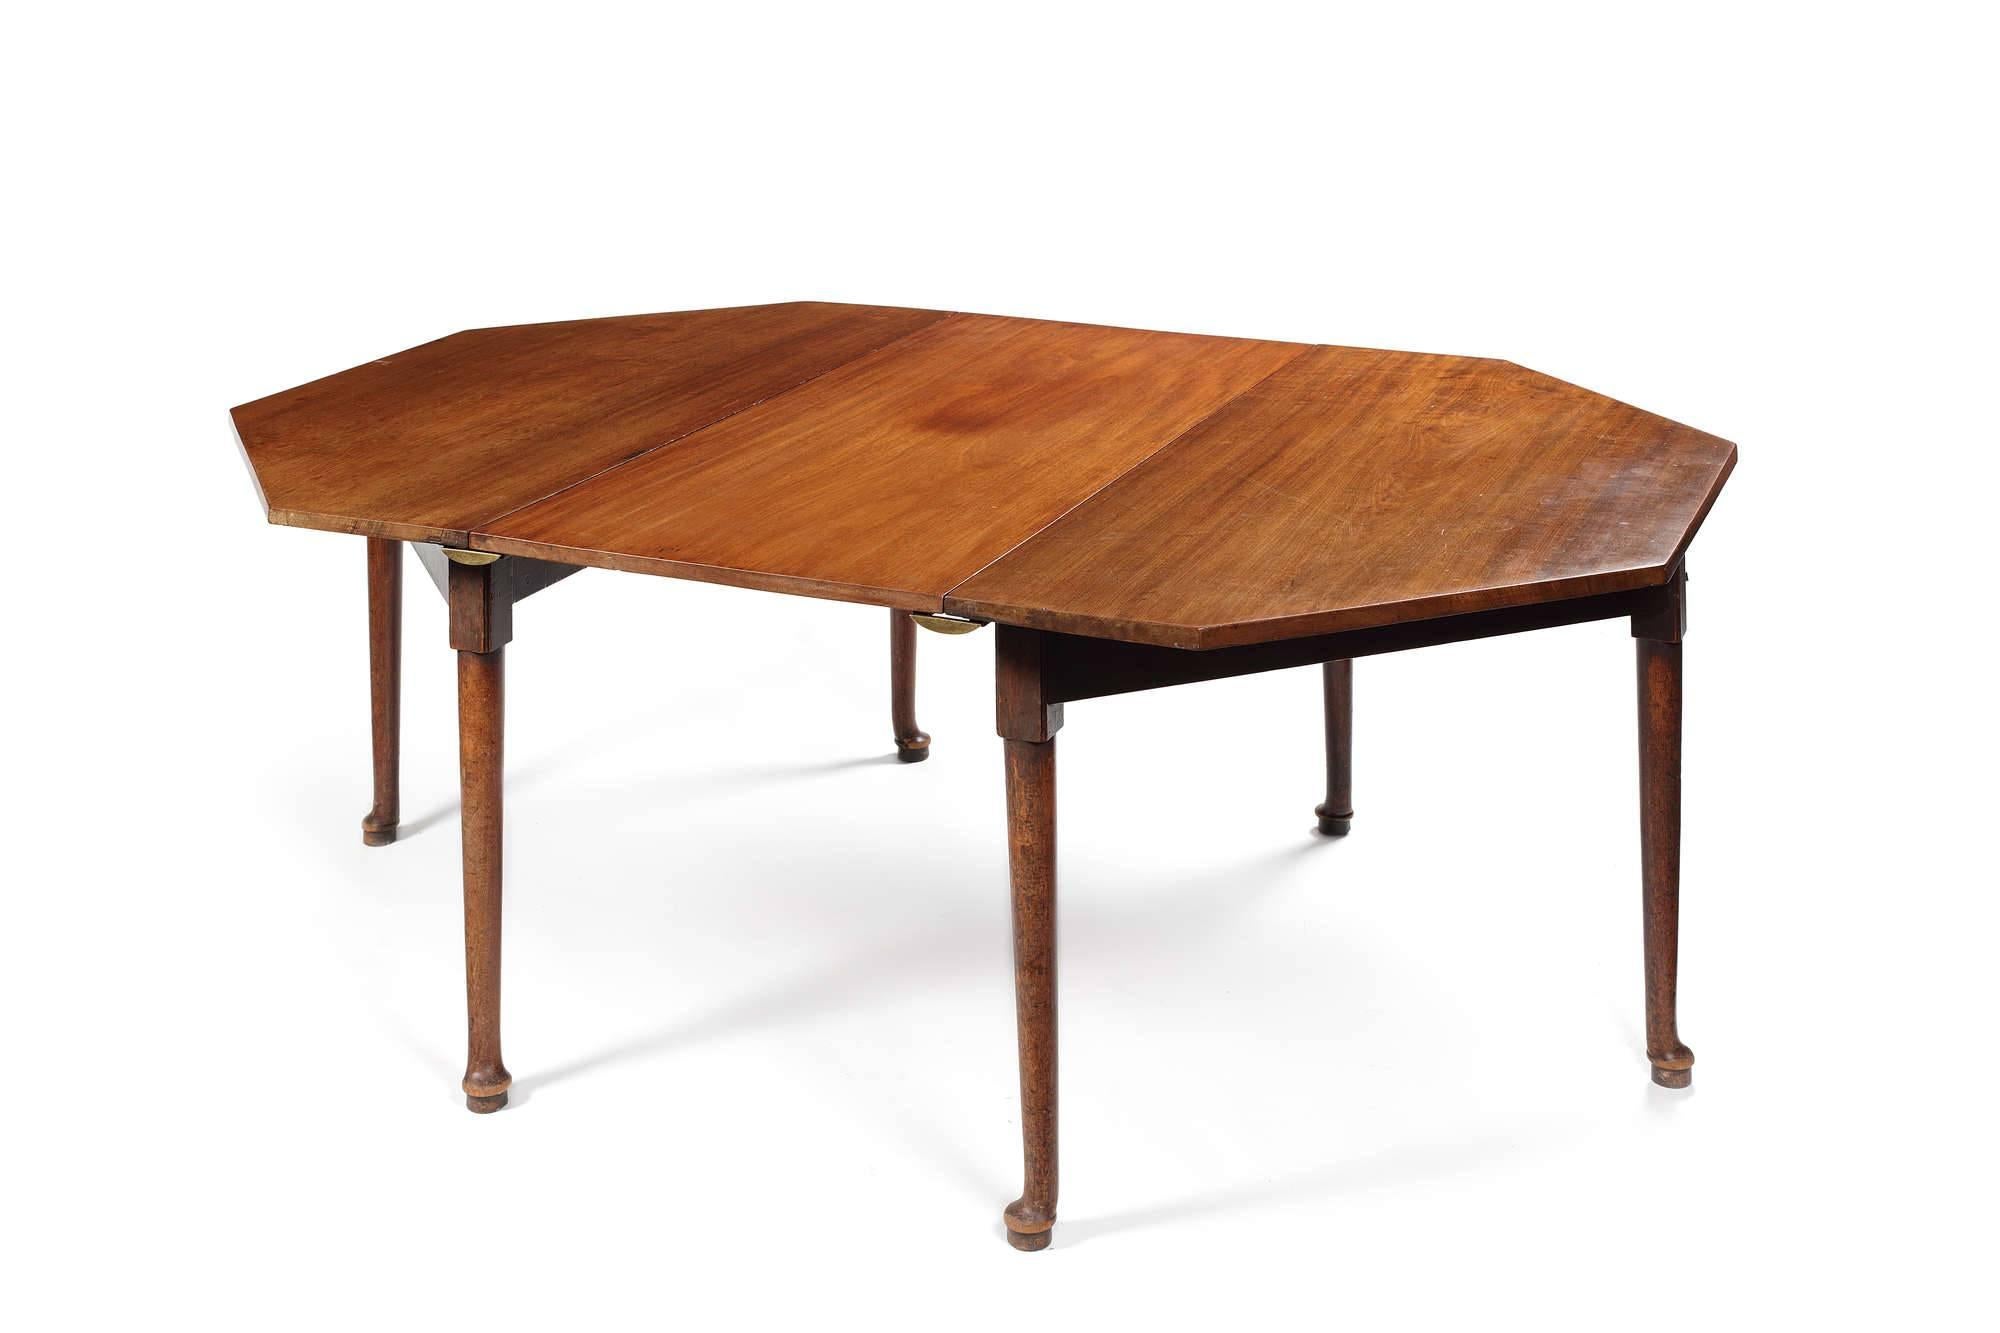 The octagonal top raised on turned tapering legs terminating in pad feet. The central leaf possibly a replacement using period timber. The table is also intended to be used as a pair of console tables when not required for dining.
? 
See S.Stuart,